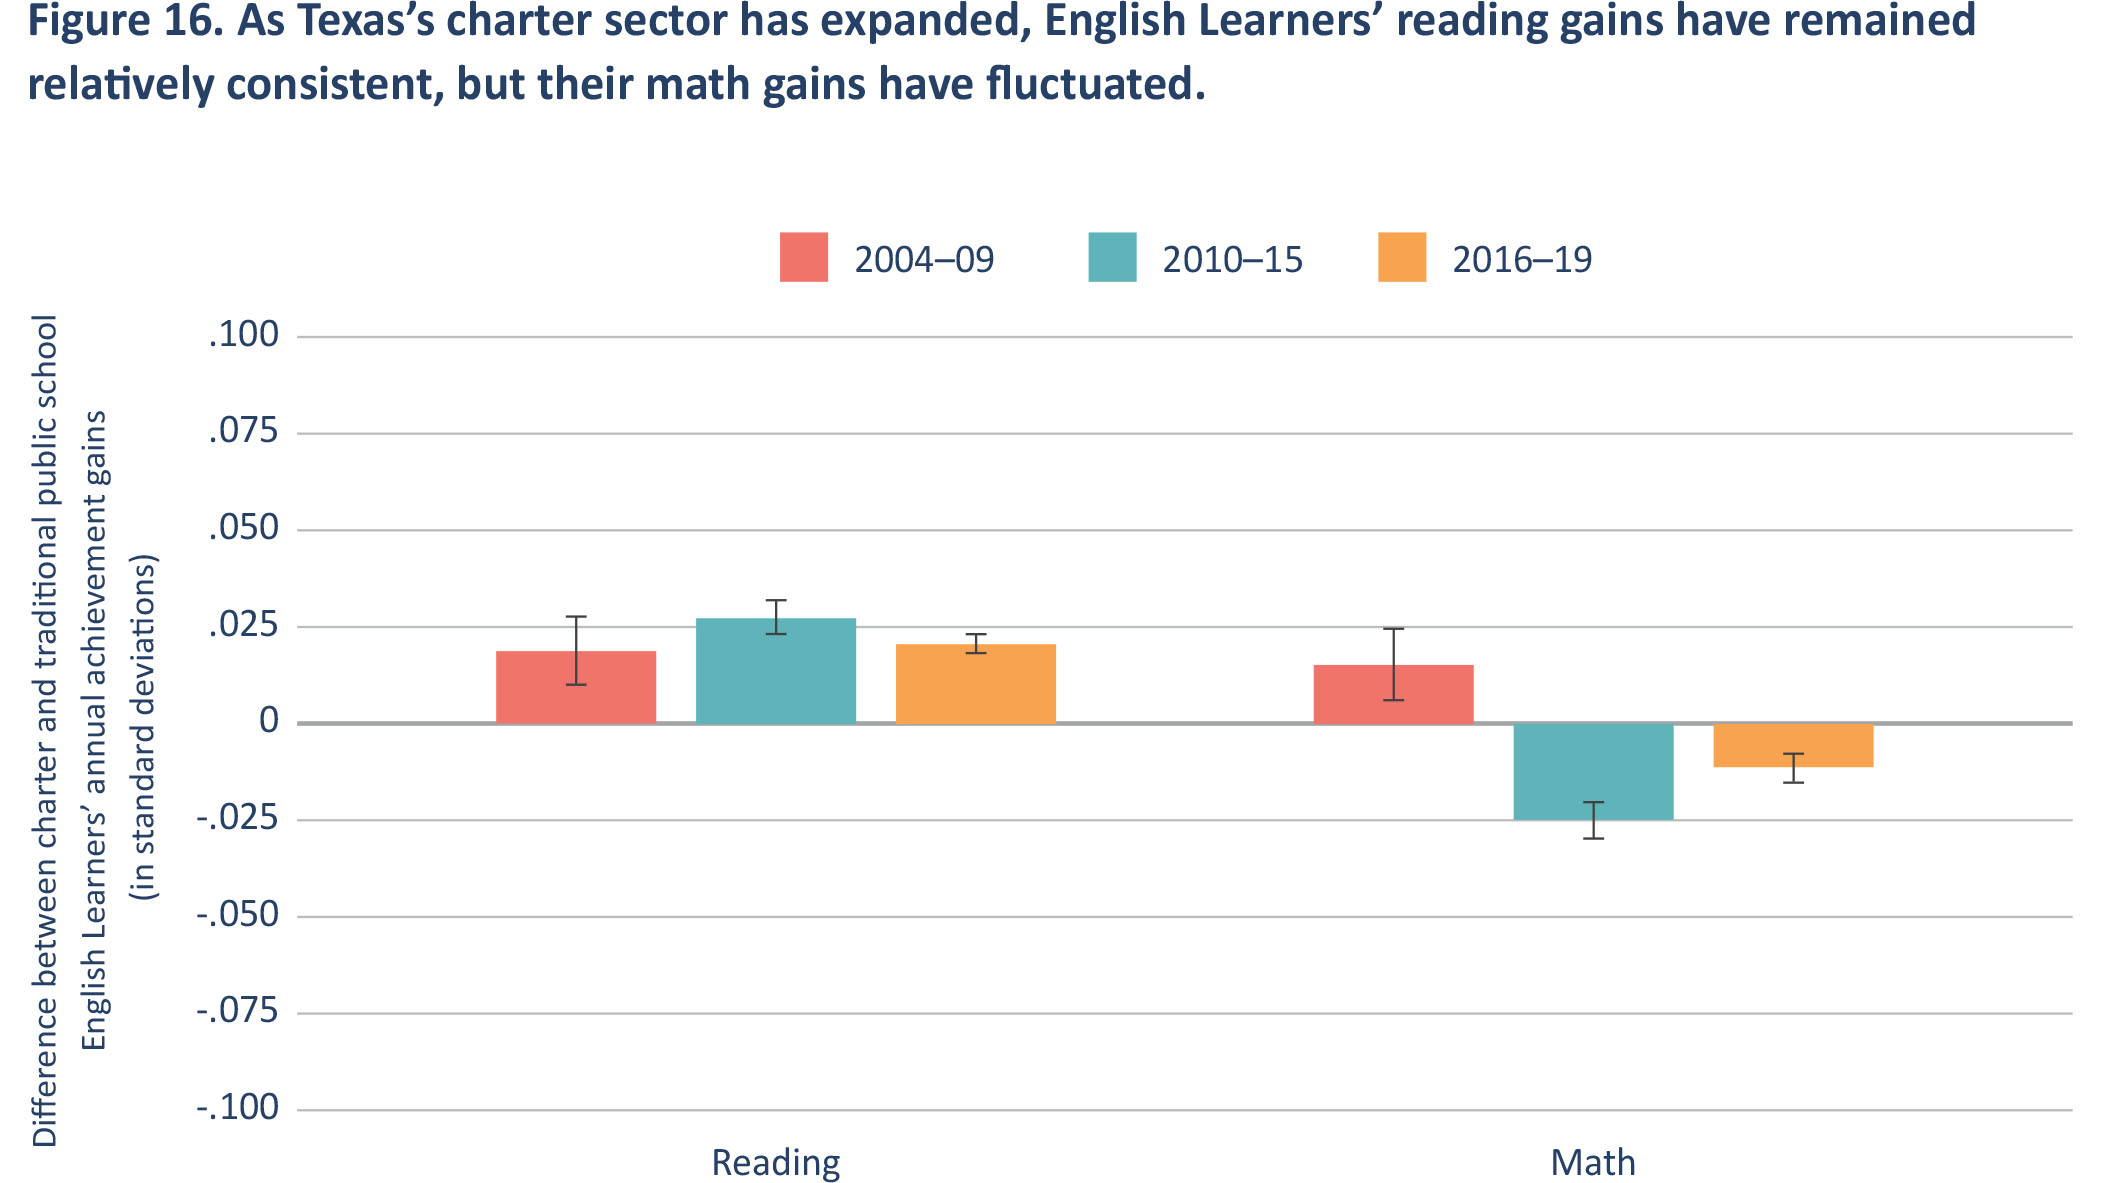 Figure 16. As Texas's charter sector has expanded, English Learners' reading gains have remained relatively consistent, but their math gains have fluctuated.